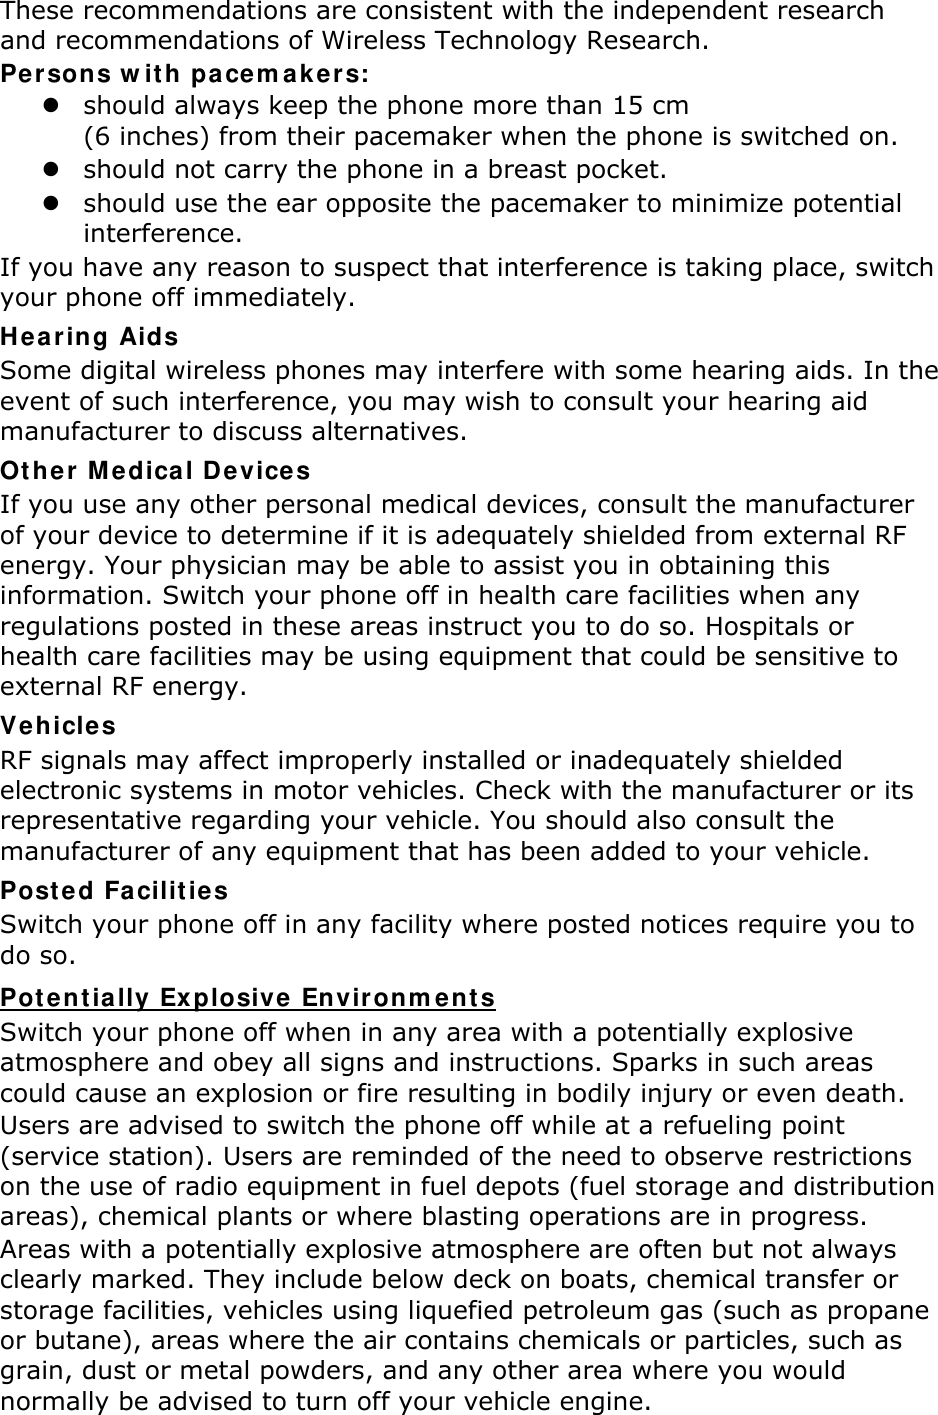 These recommendations are consistent with the independent research and recommendations of Wireless Technology Research. Persons w it h pa cem ake rs:  should always keep the phone more than 15 cm   (6 inches) from their pacemaker when the phone is switched on.  should not carry the phone in a breast pocket.  should use the ear opposite the pacemaker to minimize potential interference. If you have any reason to suspect that interference is taking place, switch your phone off immediately. Hearing Aids Some digital wireless phones may interfere with some hearing aids. In the event of such interference, you may wish to consult your hearing aid manufacturer to discuss alternatives. Ot he r Medical D evices If you use any other personal medical devices, consult the manufacturer of your device to determine if it is adequately shielded from external RF energy. Your physician may be able to assist you in obtaining this information. Switch your phone off in health care facilities when any regulations posted in these areas instruct you to do so. Hospitals or health care facilities may be using equipment that could be sensitive to external RF energy. Vehicle s RF signals may affect improperly installed or inadequately shielded electronic systems in motor vehicles. Check with the manufacturer or its representative regarding your vehicle. You should also consult the manufacturer of any equipment that has been added to your vehicle. Post ed Facilit ies Switch your phone off in any facility where posted notices require you to do so. Potent ia lly Ex plosive Environ m ent s Switch your phone off when in any area with a potentially explosive atmosphere and obey all signs and instructions. Sparks in such areas could cause an explosion or fire resulting in bodily injury or even death. Users are advised to switch the phone off while at a refueling point (service station). Users are reminded of the need to observe restrictions on the use of radio equipment in fuel depots (fuel storage and distribution areas), chemical plants or where blasting operations are in progress. Areas with a potentially explosive atmosphere are often but not always clearly marked. They include below deck on boats, chemical transfer or storage facilities, vehicles using liquefied petroleum gas (such as propane or butane), areas where the air contains chemicals or particles, such as grain, dust or metal powders, and any other area where you would normally be advised to turn off your vehicle engine. 